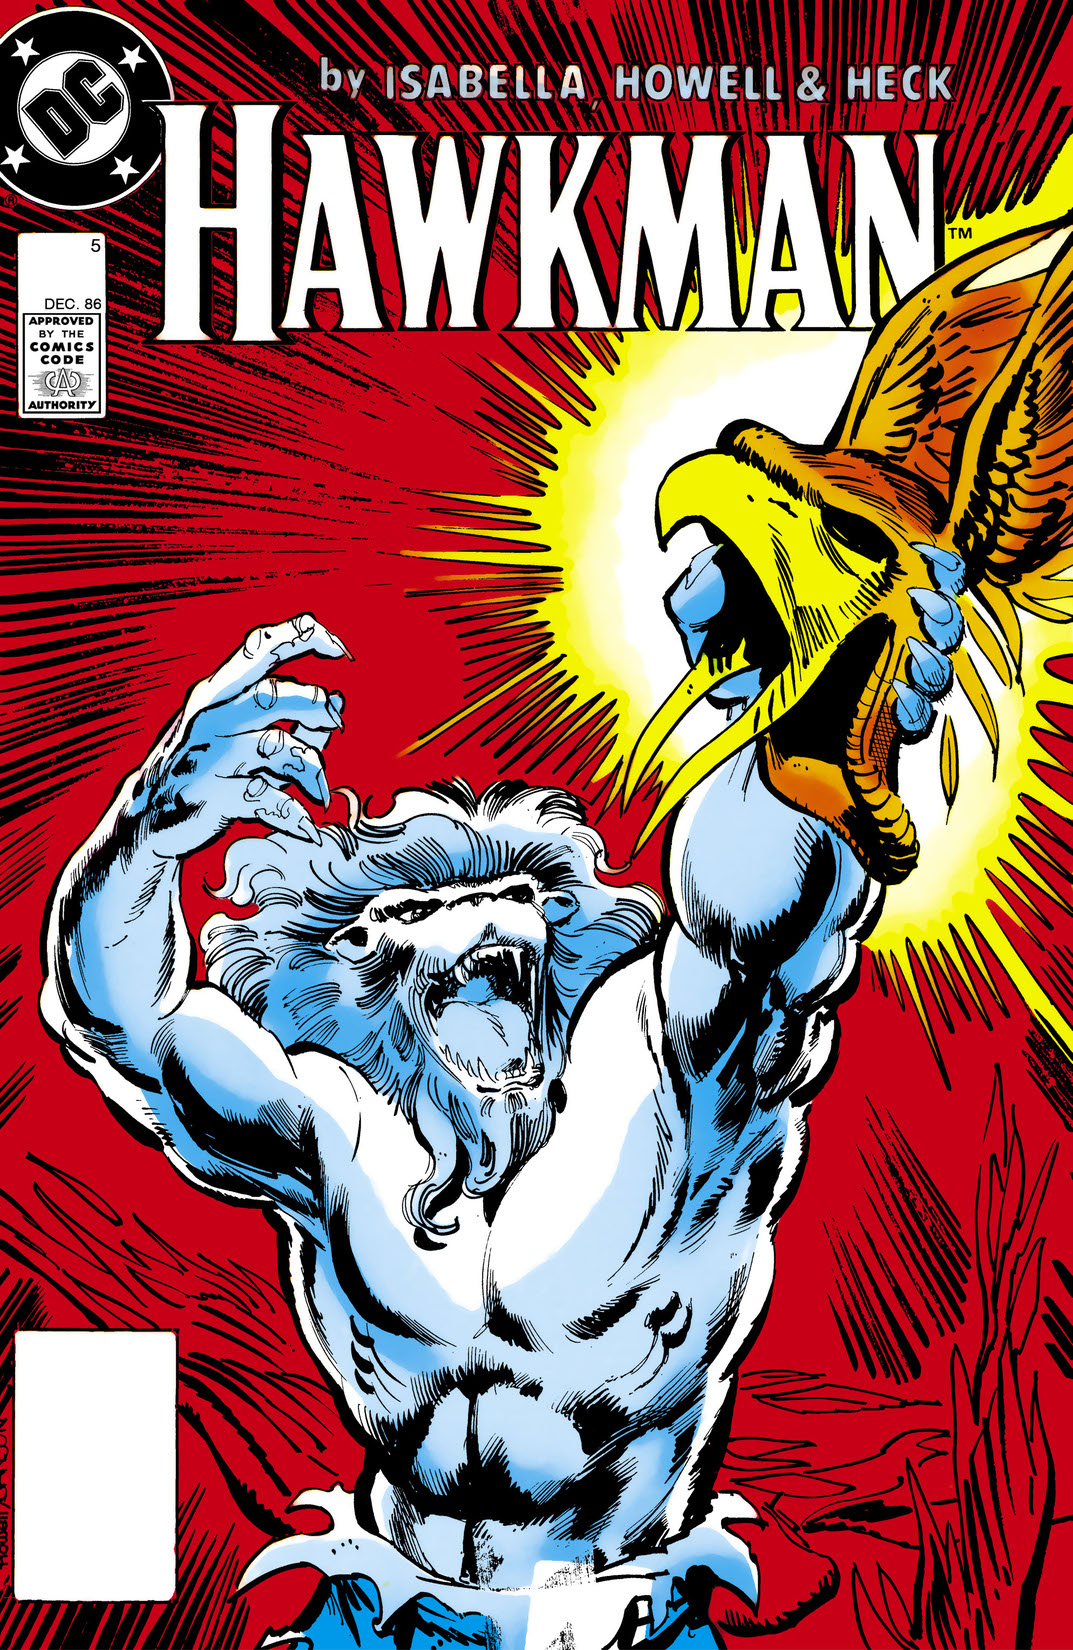 Hawkman (1986-) #5 preview images